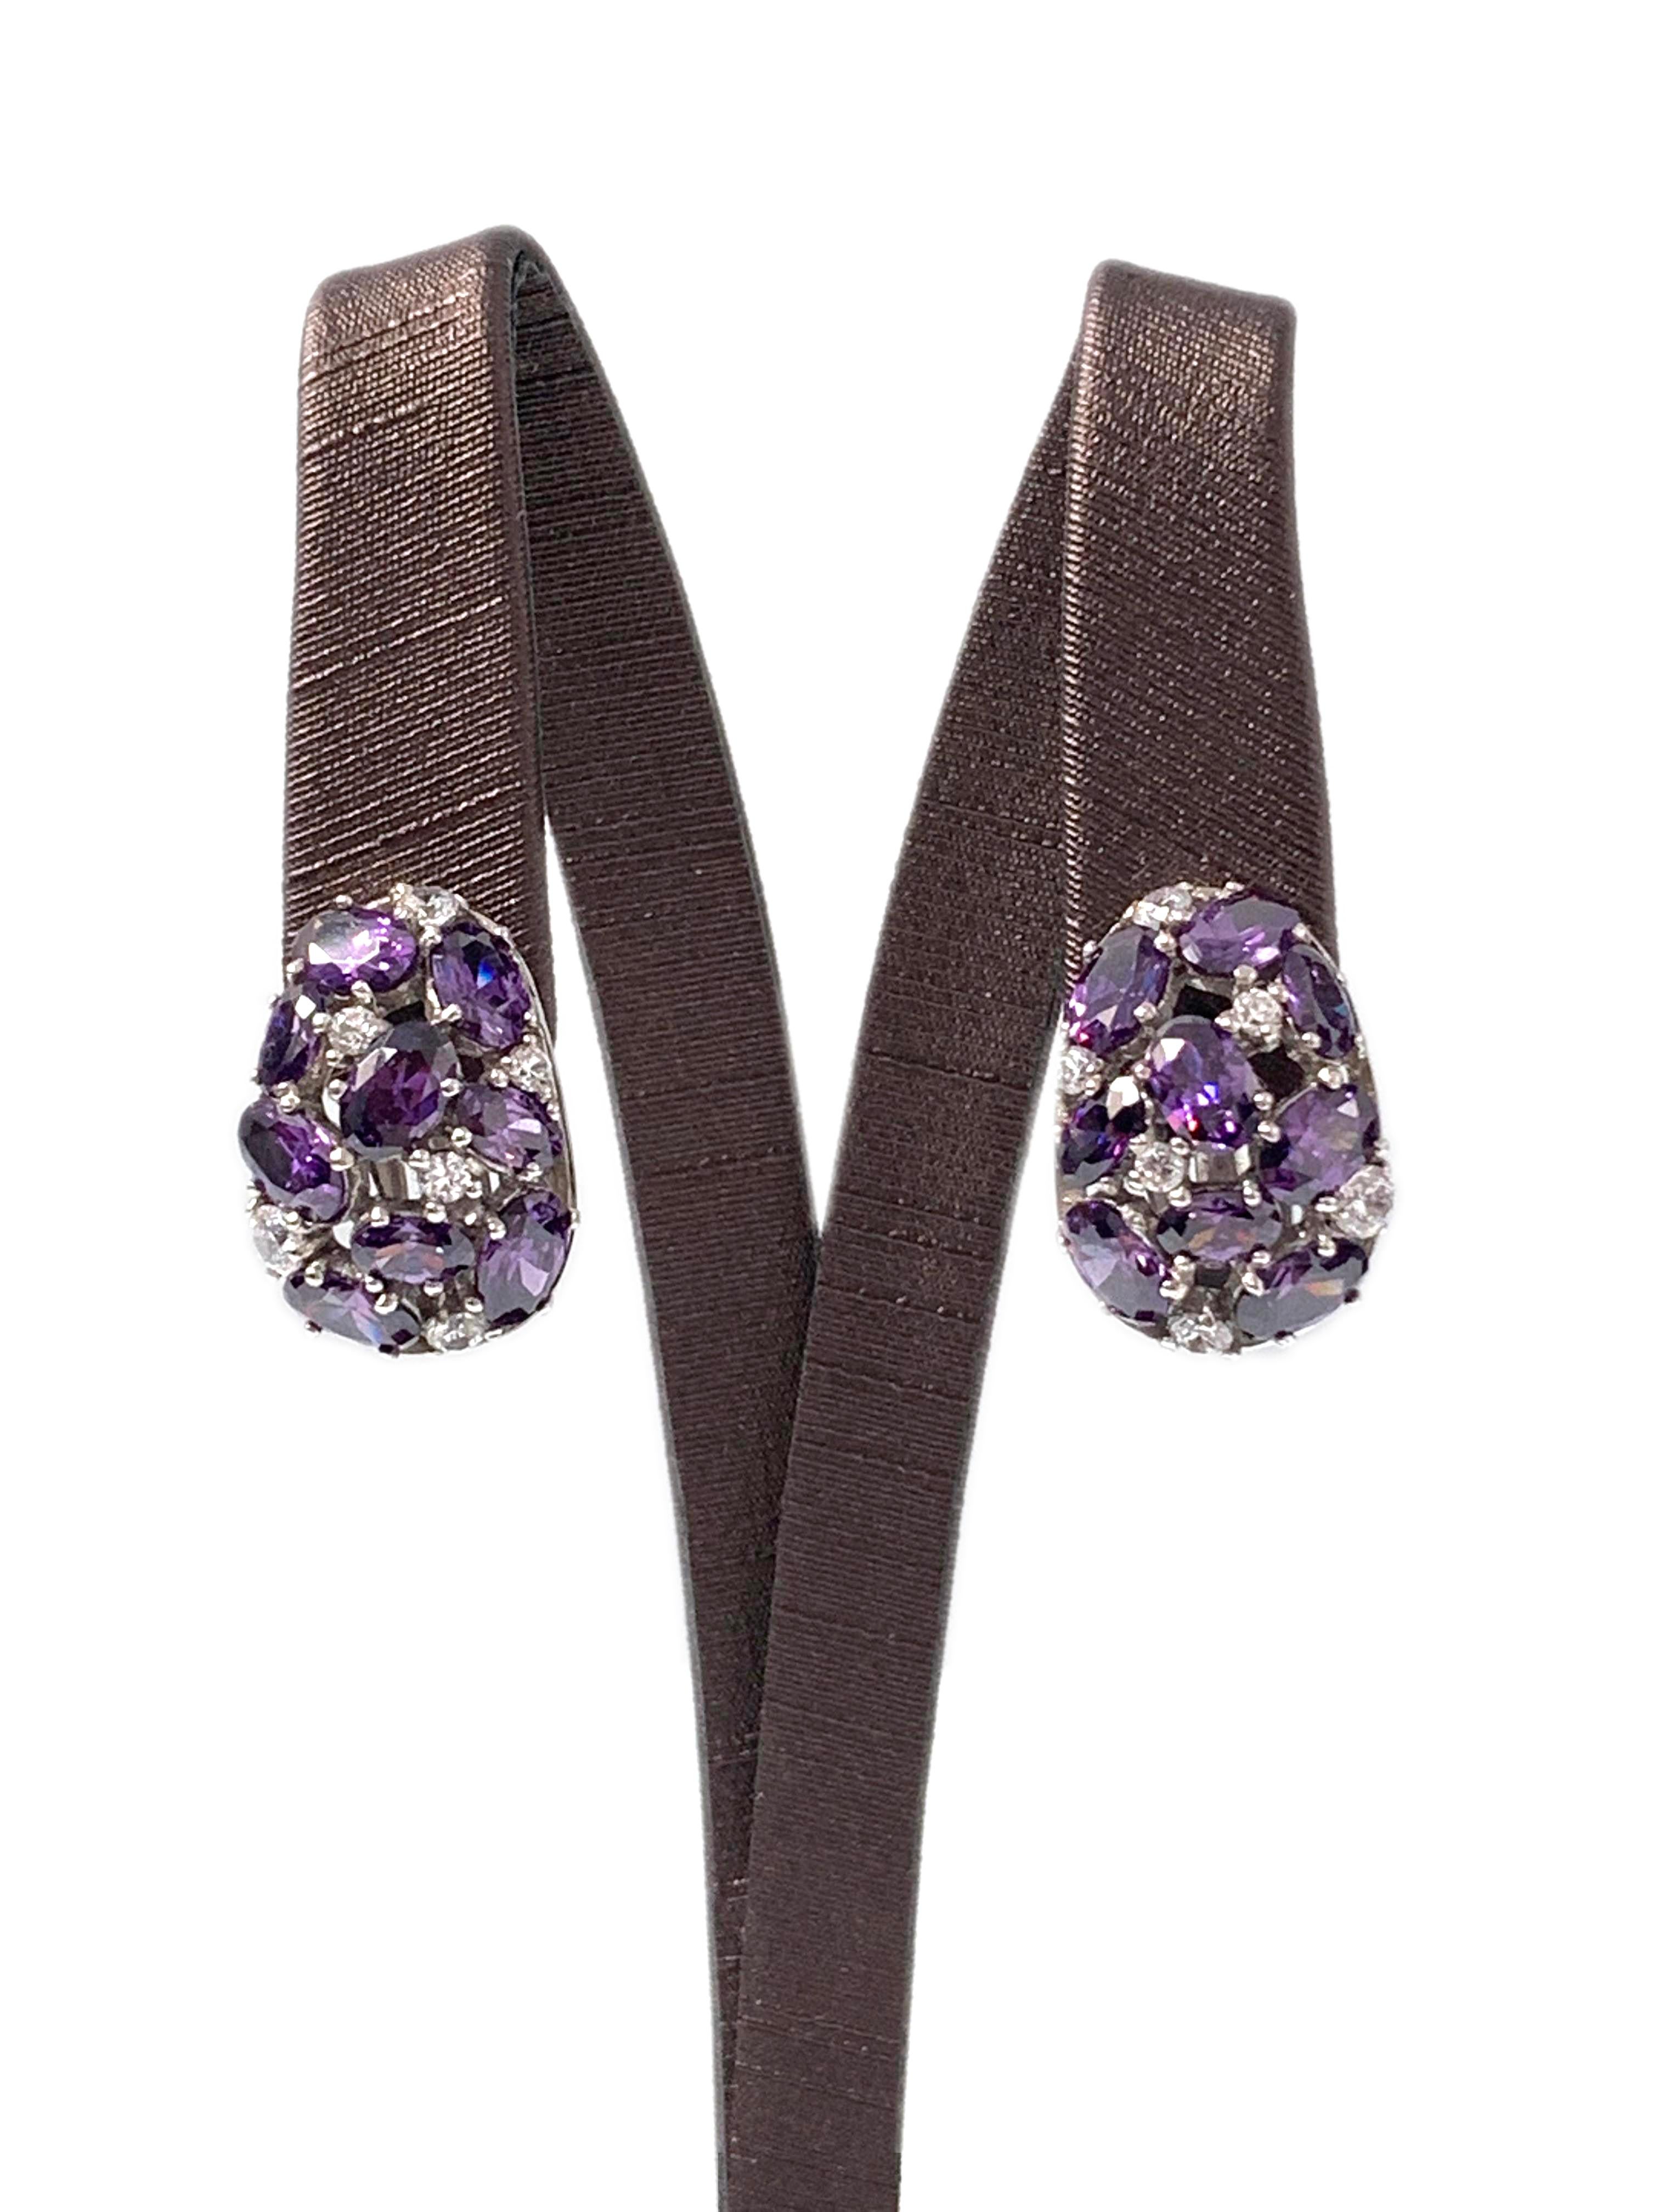 Fabulous egg-shape encrusted Amethyst CZ and Simulated Diamond Clip-on Earrings

These earrings feature 30 pcs of oval Amethyst CZ and round simulated diamond, handset in platinum rhodium plated sterling silver. The earrings measure approximately